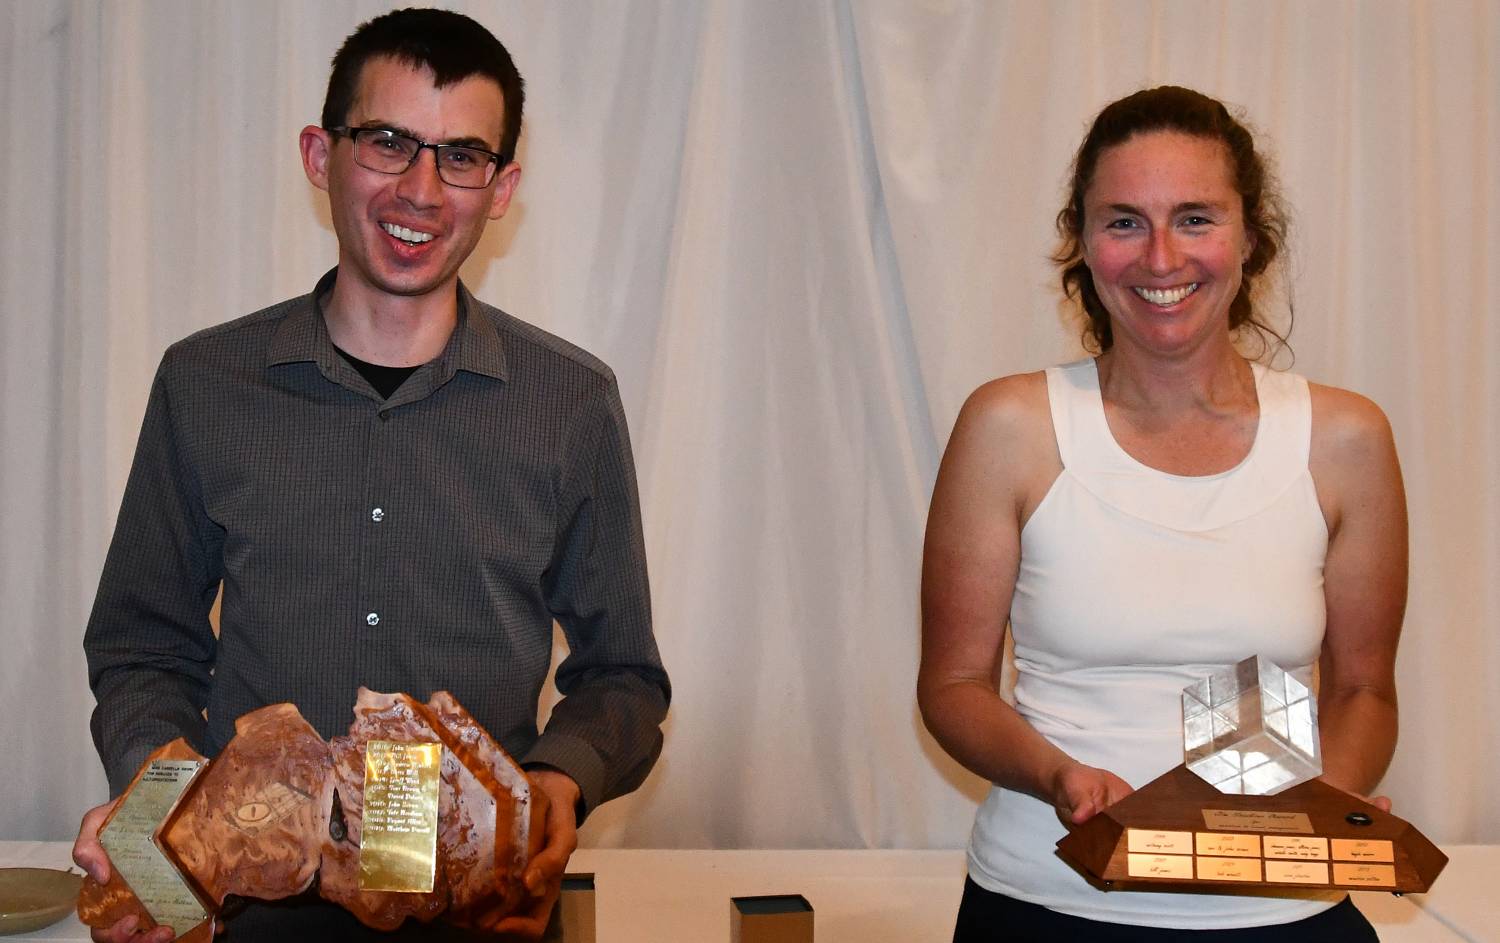 Matthew Purcell and Cathy Hogg Receive OACT Highest Awards